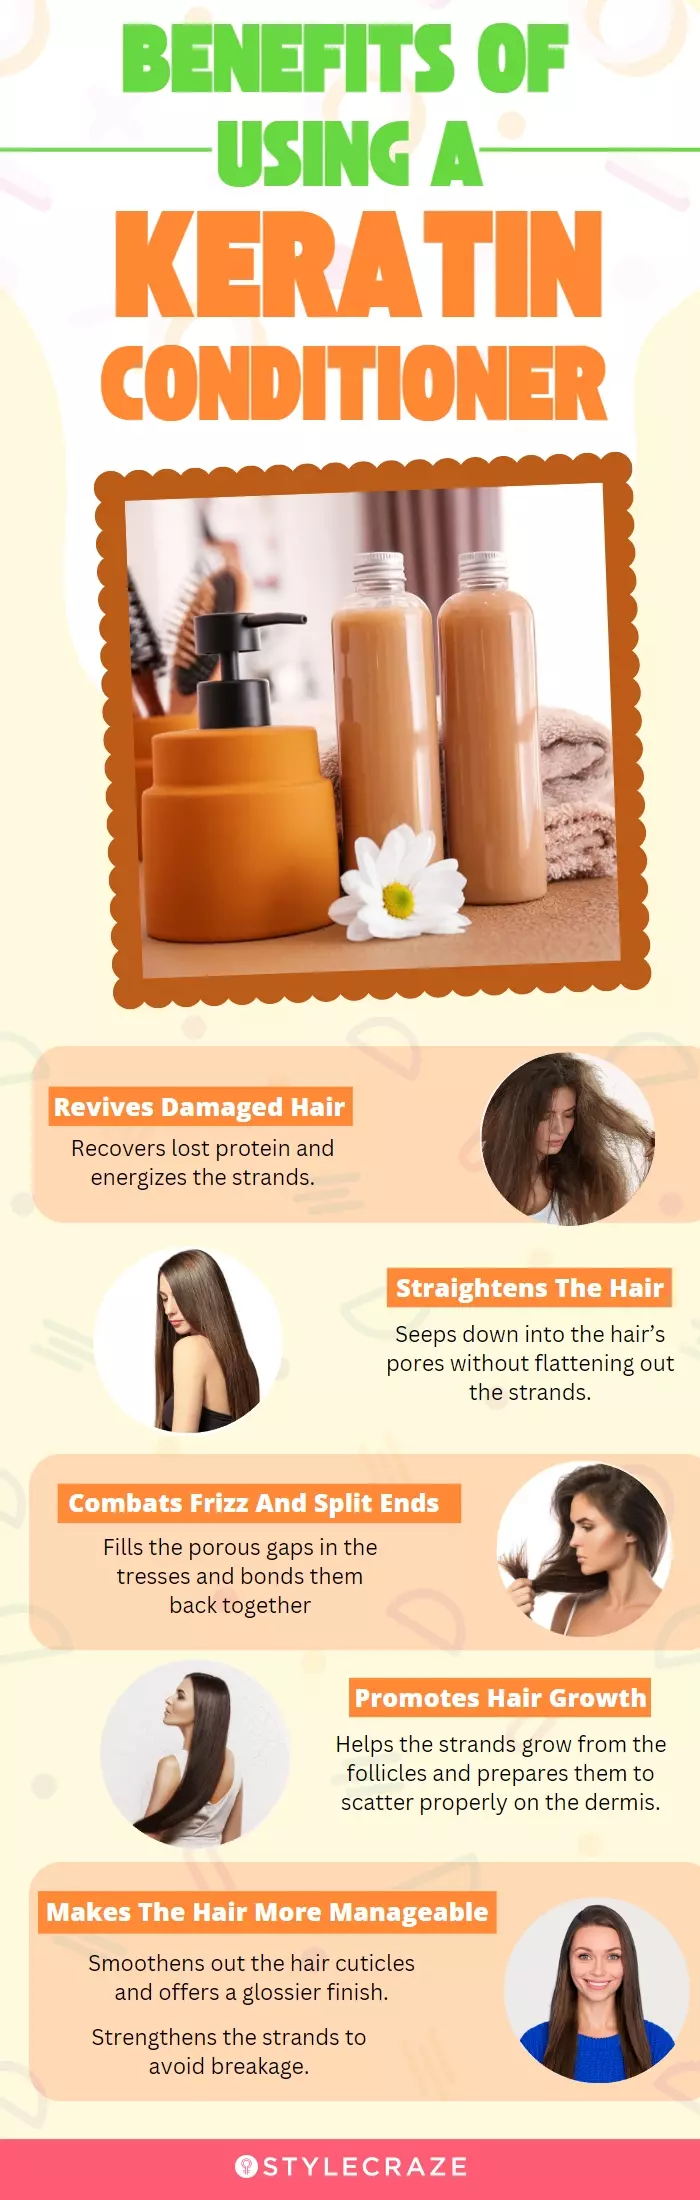 Keratin Conditioners: Benefits & Application Tips (infographic)